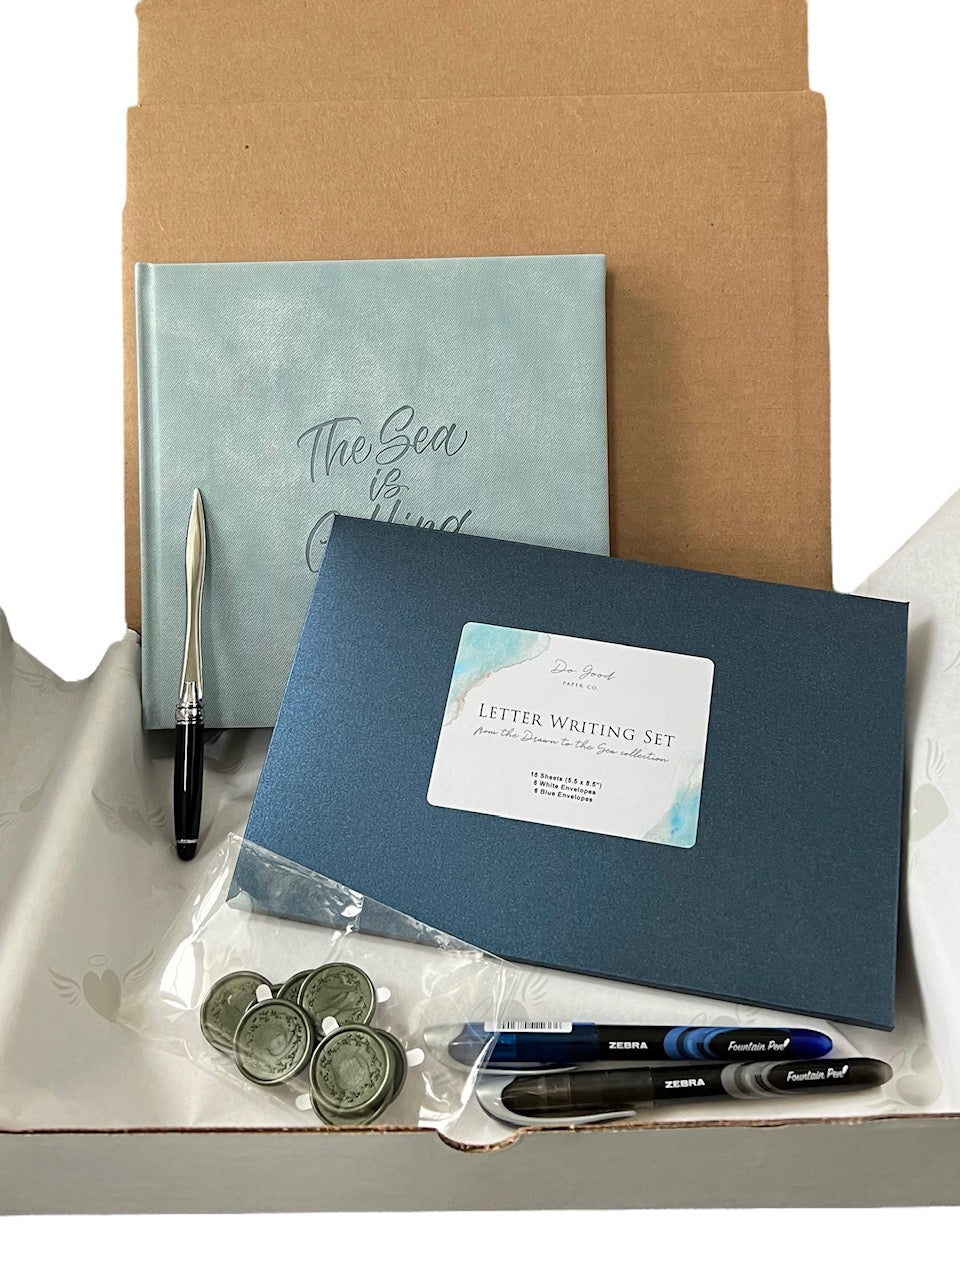 Subscription box items, such as a journal, letter writing set, pens, wax seals and a letter opener, displayed inside a box on a grey chair